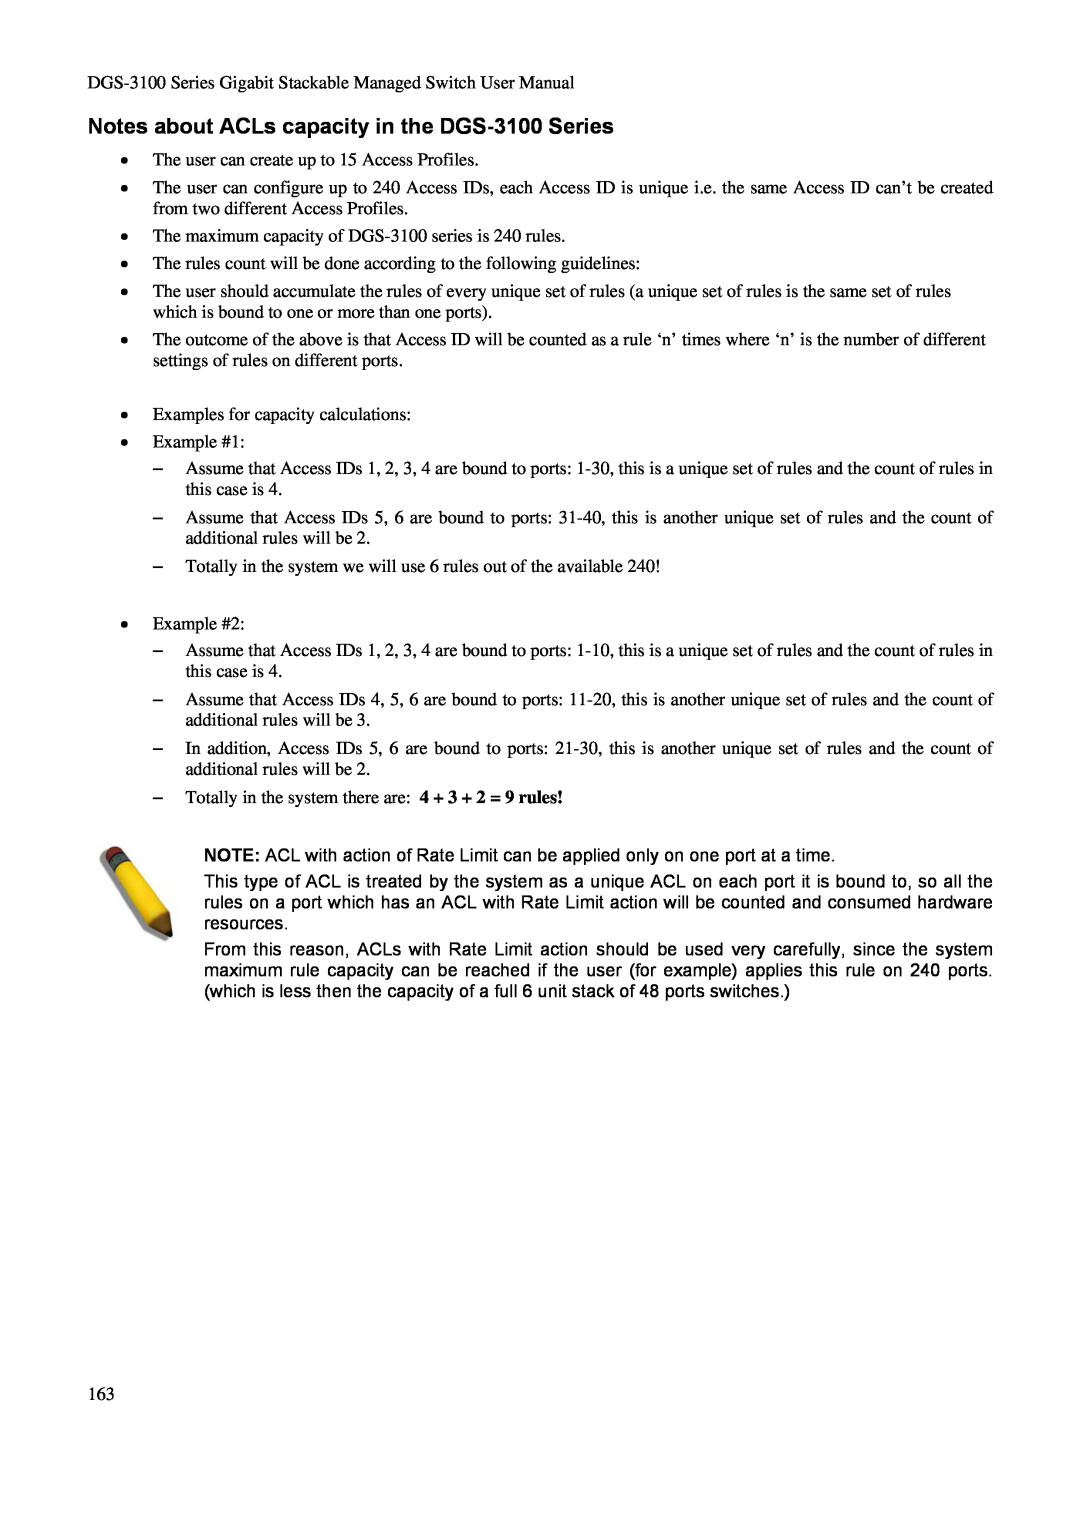 D-Link user manual Notes about ACLs capacity in the DGS-3100 Series 